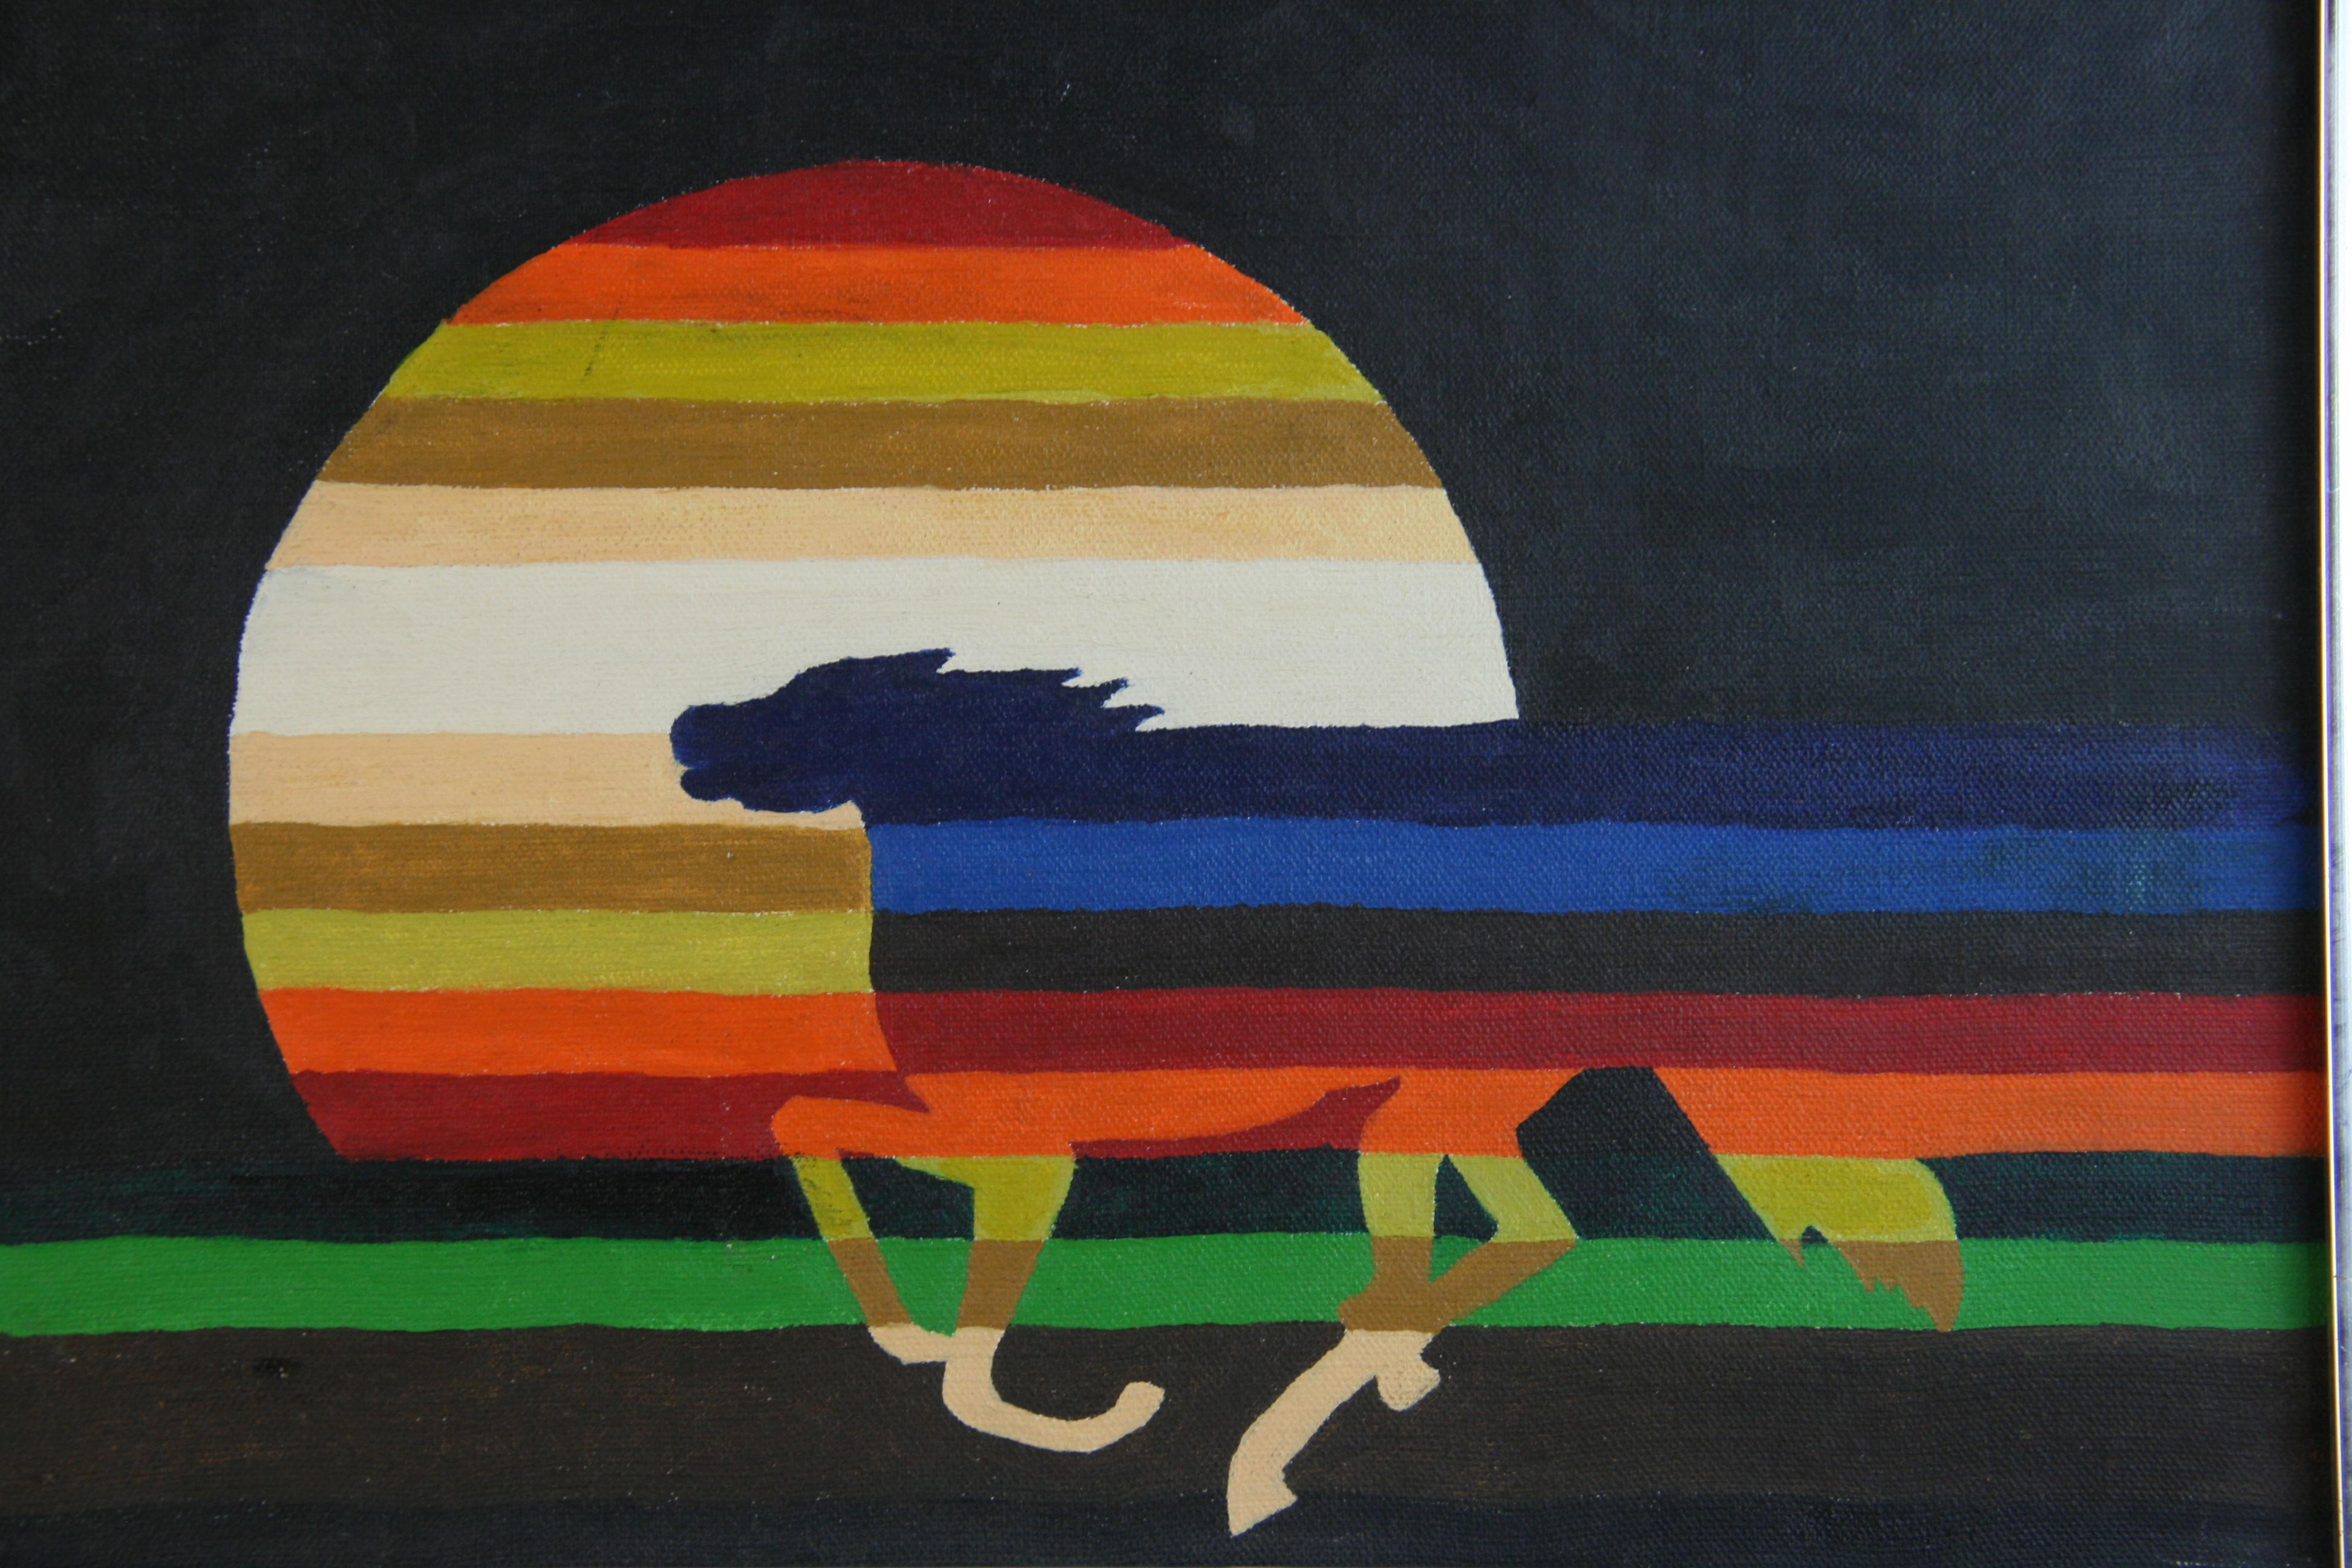 Unknown Animal Painting - Modern Surreal Animal Acrylic Painting Horse in The Sunset 1970's